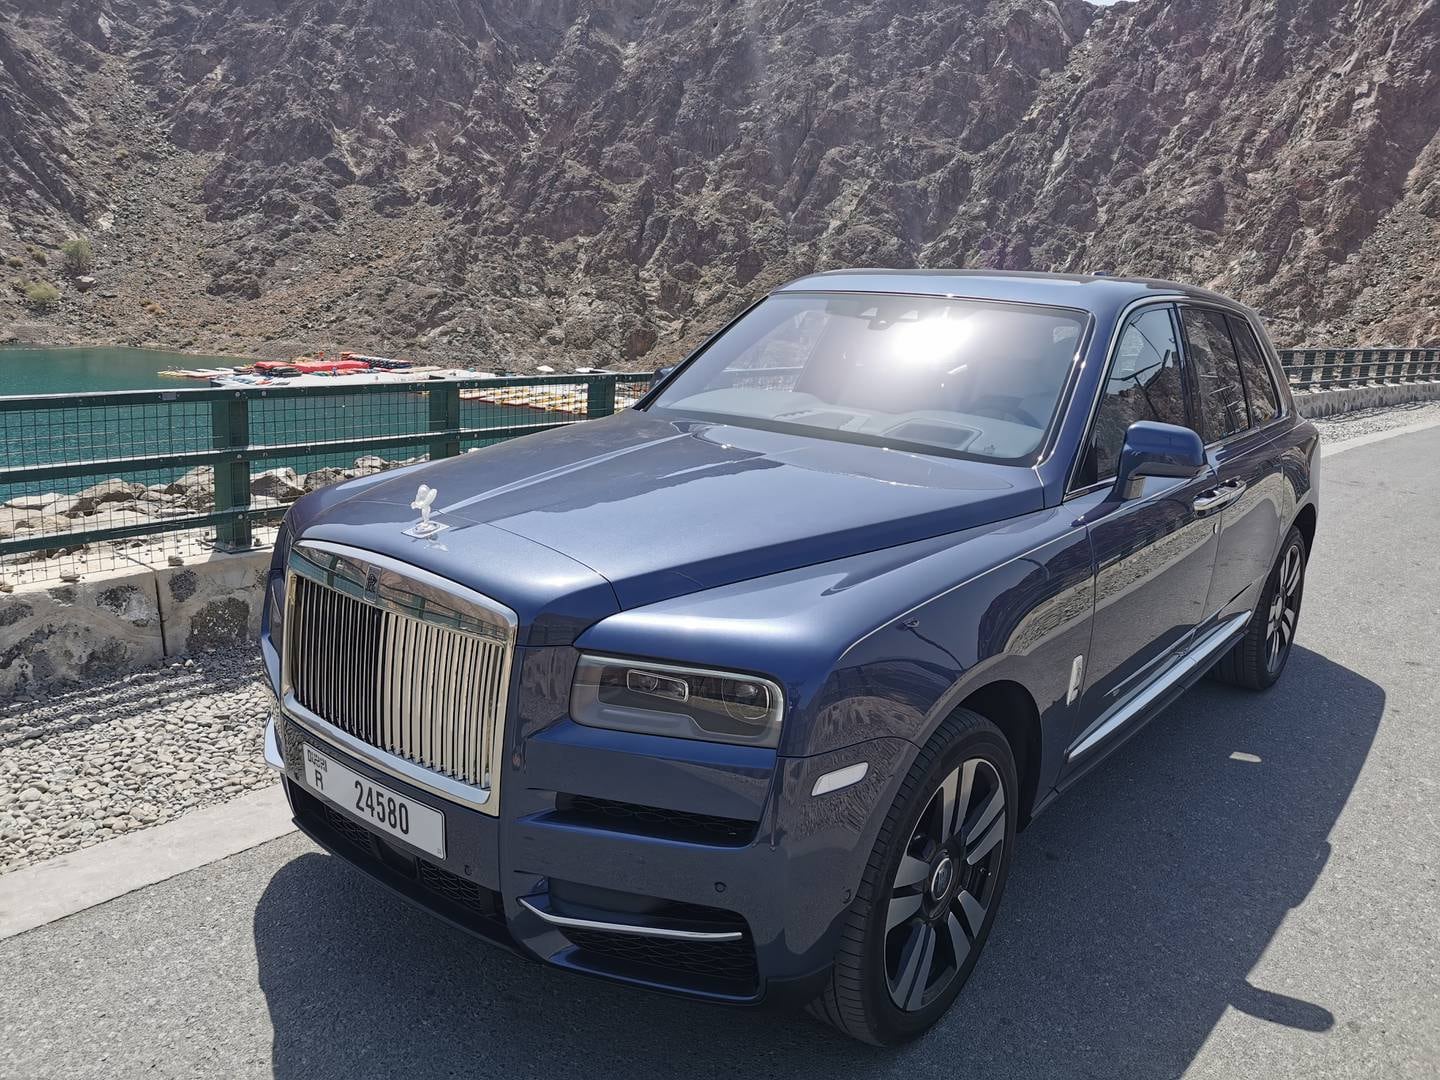 The Rolls-Royce Cullinan SUV is powered by a 6.75-litre V12 engine, which gets it from 0 to 100kph in 5.2 seconds.